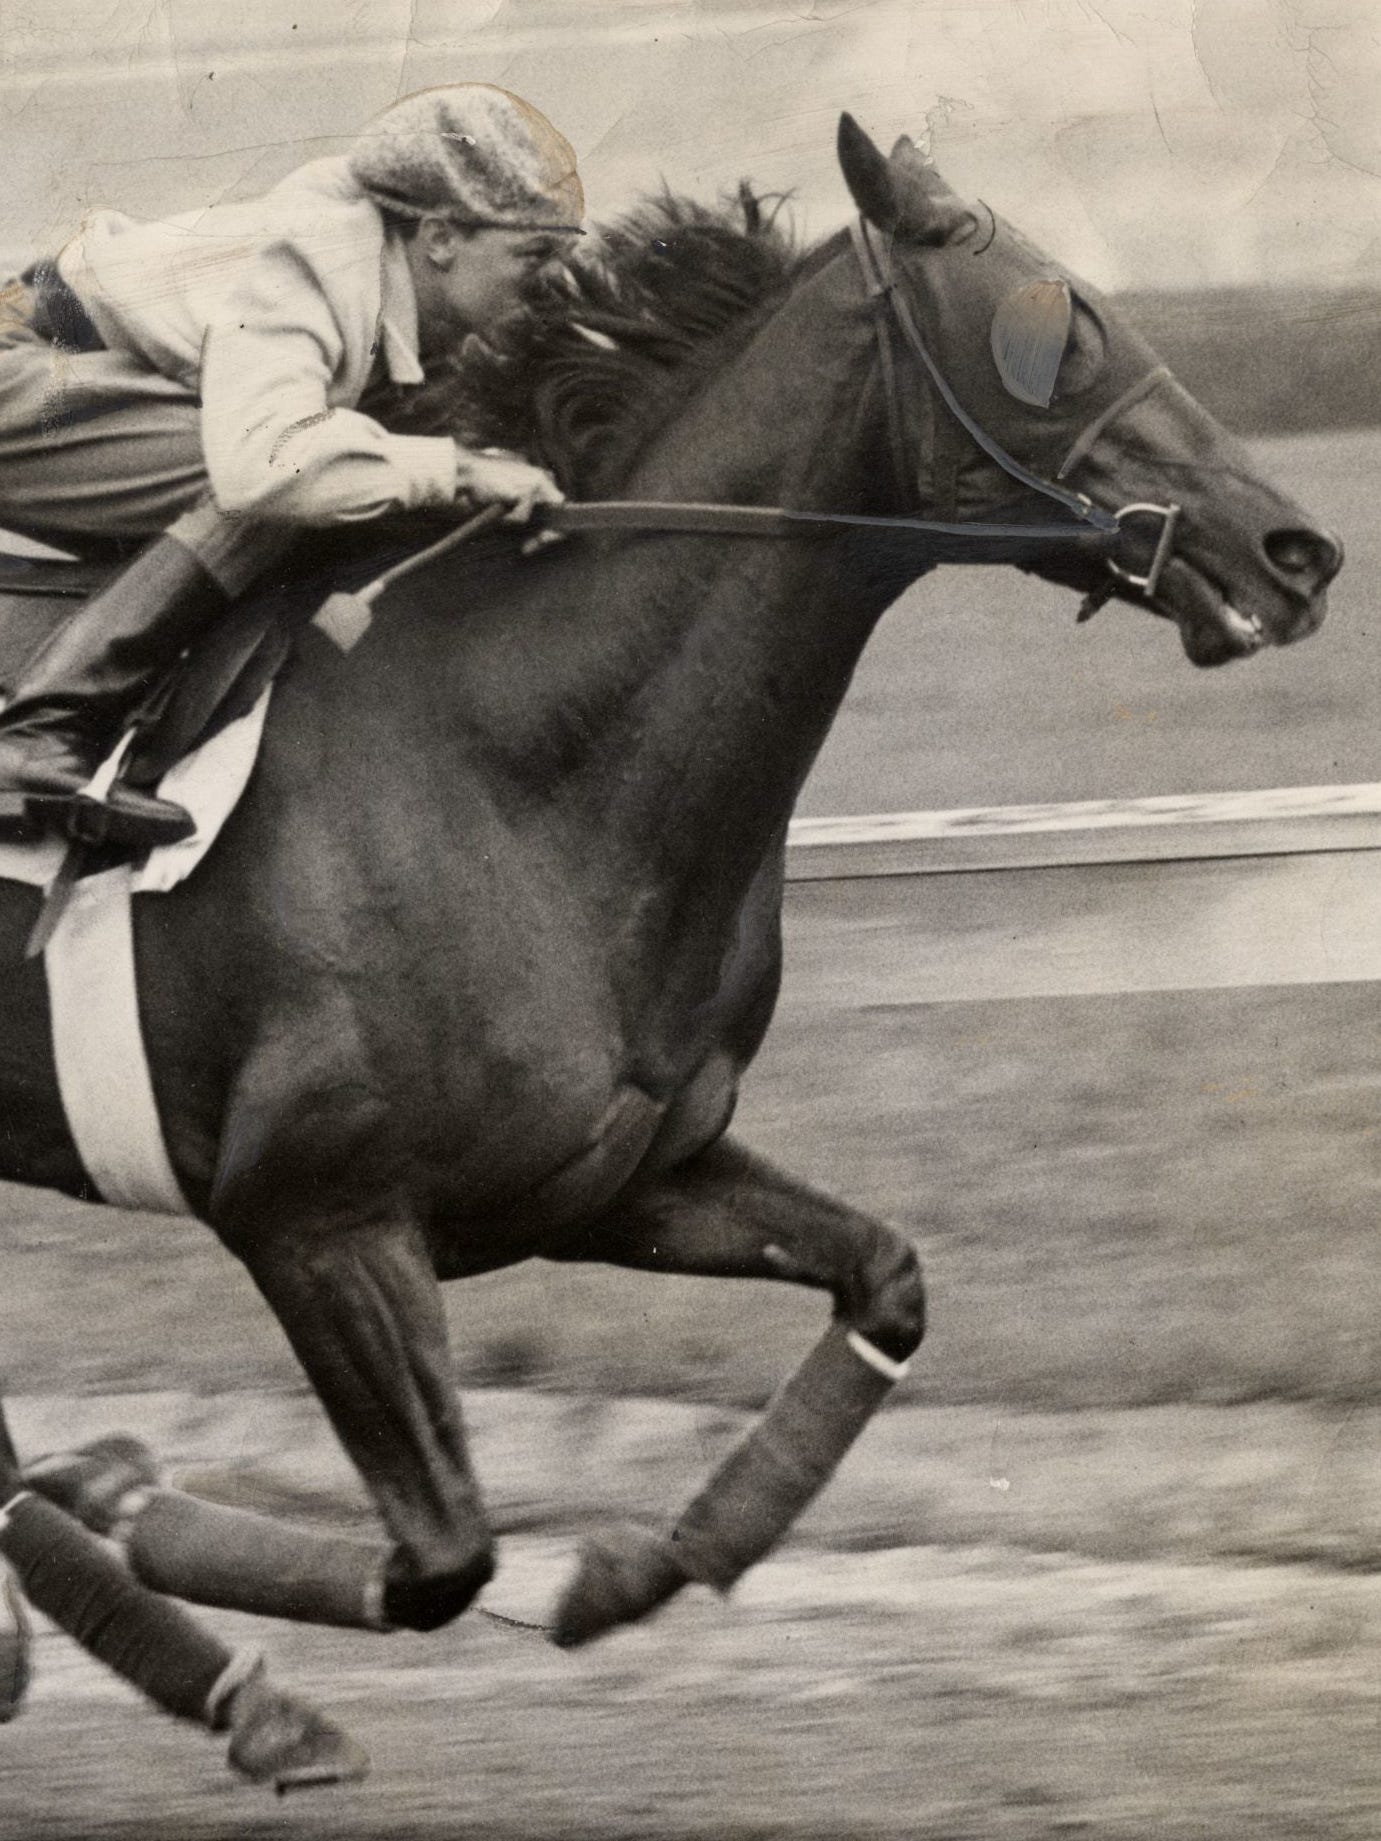 Whirlaway in action on May 2, 1941. All the tremendous power and muscular coordination are shown as he worked out at Churchill Downs for his record-breaking run a few days later in the Derby. Here's Whirlaway in action. All the tremendous power and muscular coordination is shown as he worked out at Churchill Downs for his record-breaking run a few days later in the 1941 Kentucky Derby. May 2 1941.